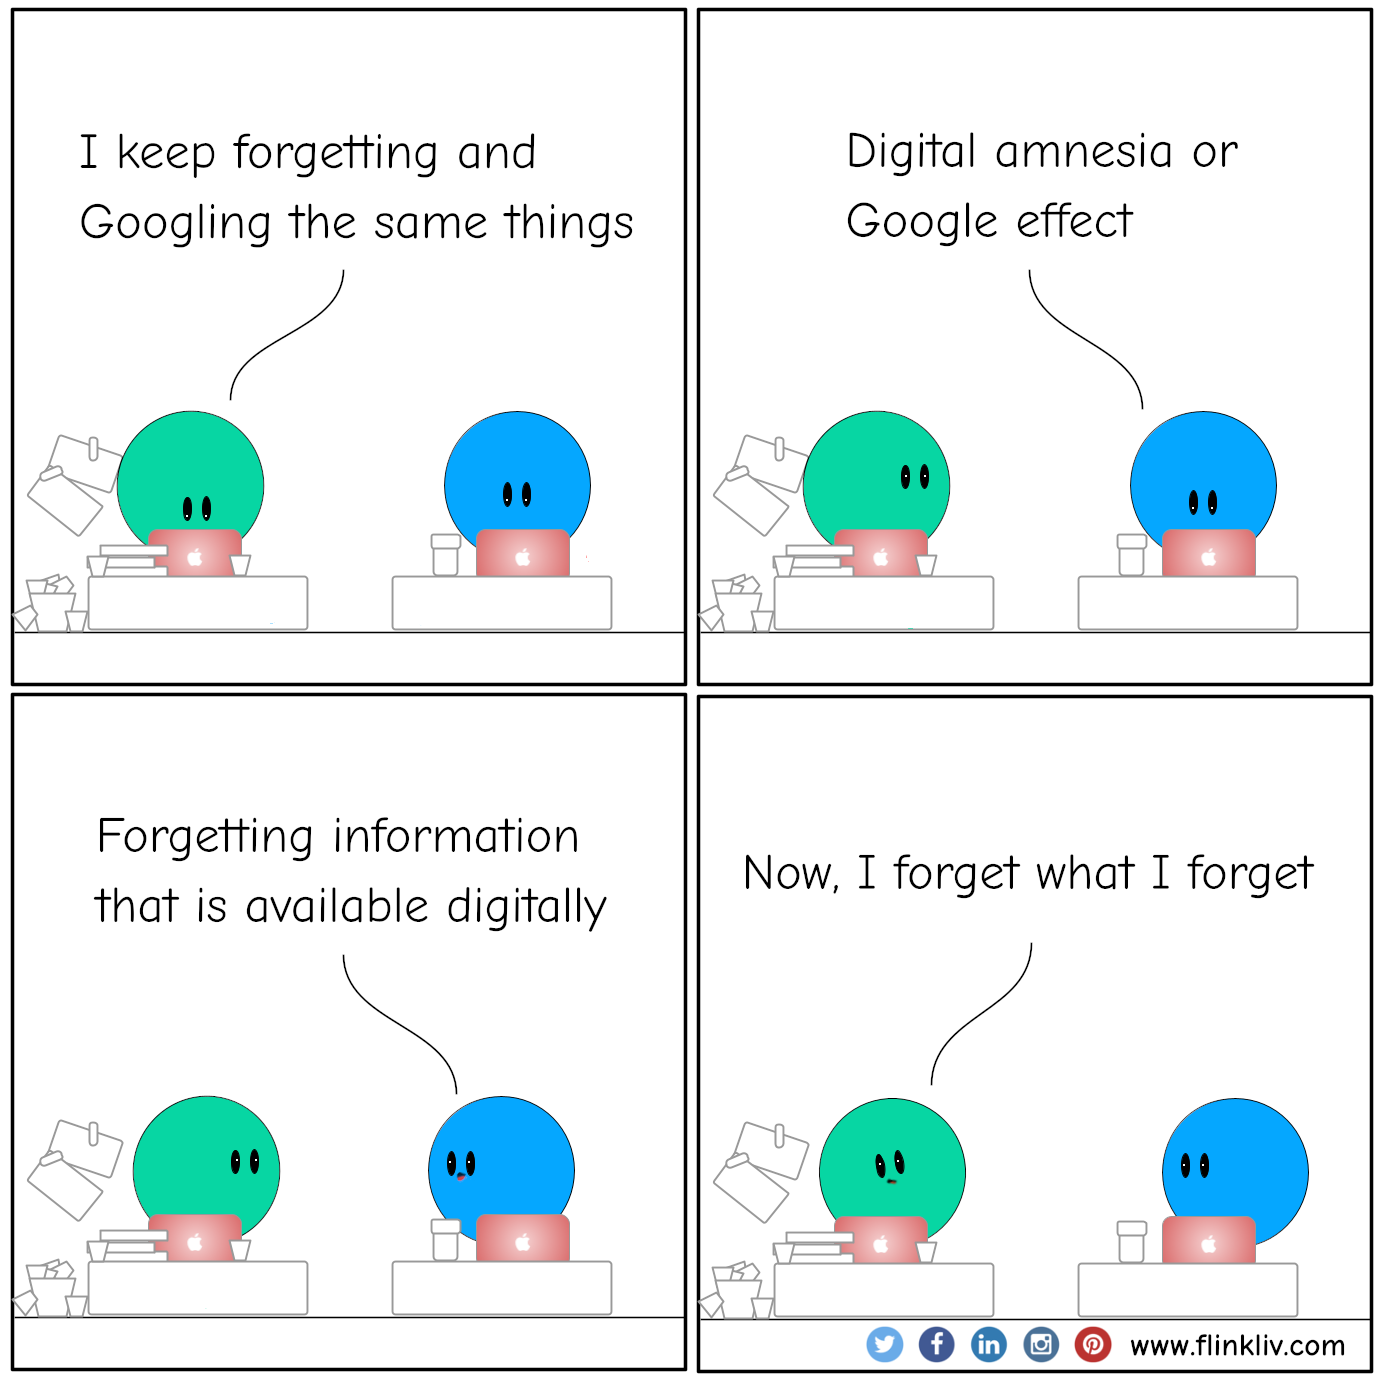 Conversation between A and B about Digital amnesia or Google effect
				A: I keep forgetting and Googling the same thing
				B: Digital amnesia or Google effect
				B: Forgetting information that is available digitally.
				A: Digital what? I will google it later
				A: Now, I forget what I forget
              